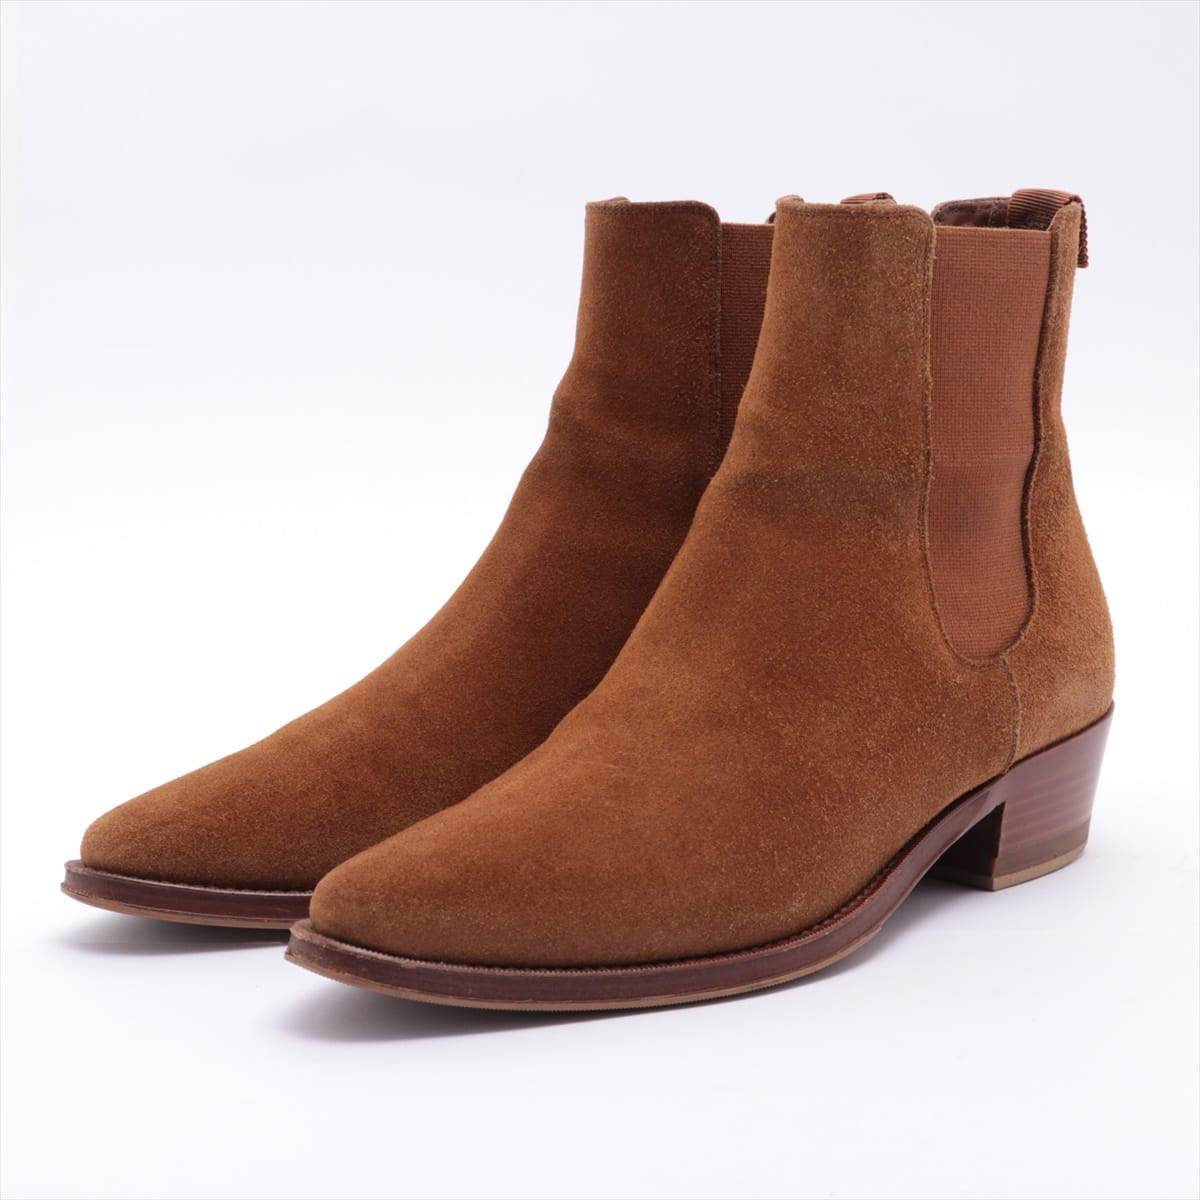 CELINE Suede leather Side Gore Boots 37 1/2 Ladies' Brown 774302 chelsea boots